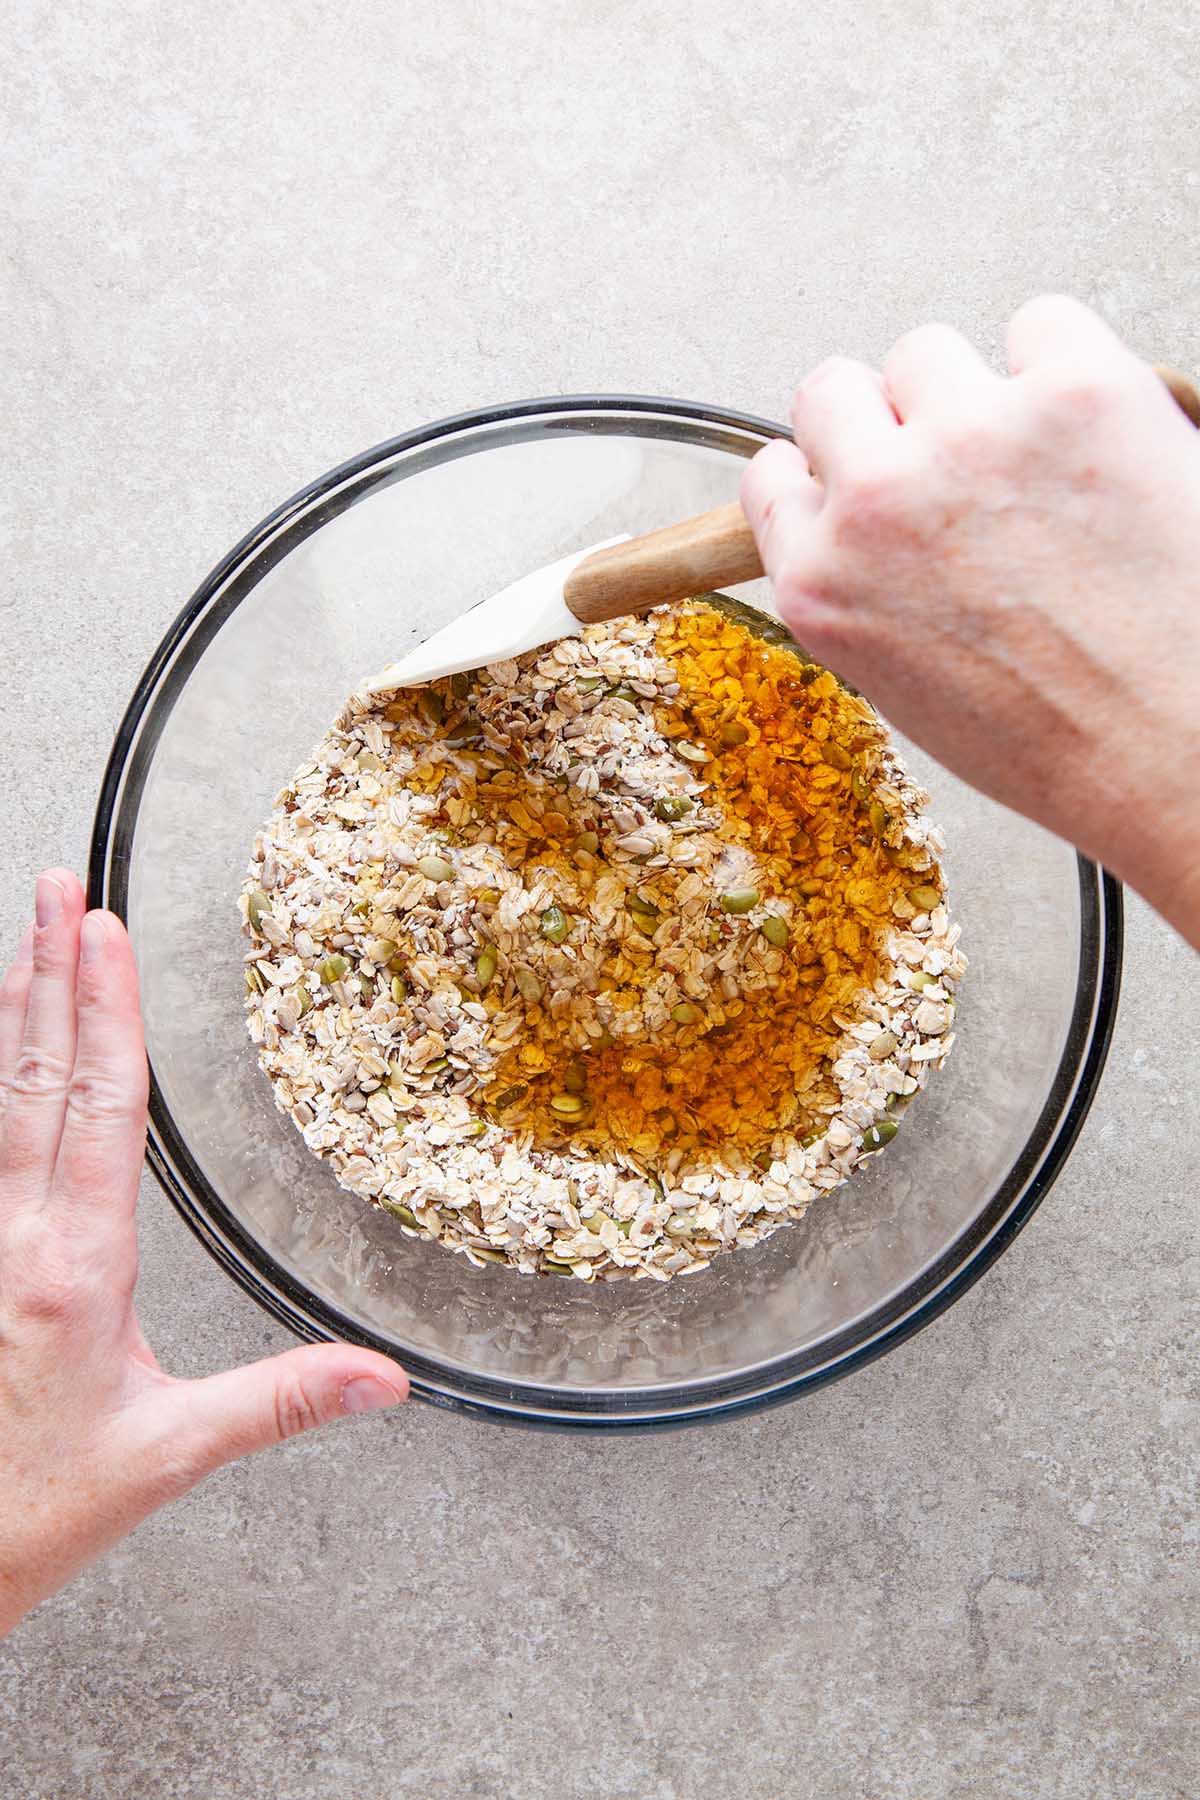 A hand about to stir a bowl of oats, seeds, and honey.